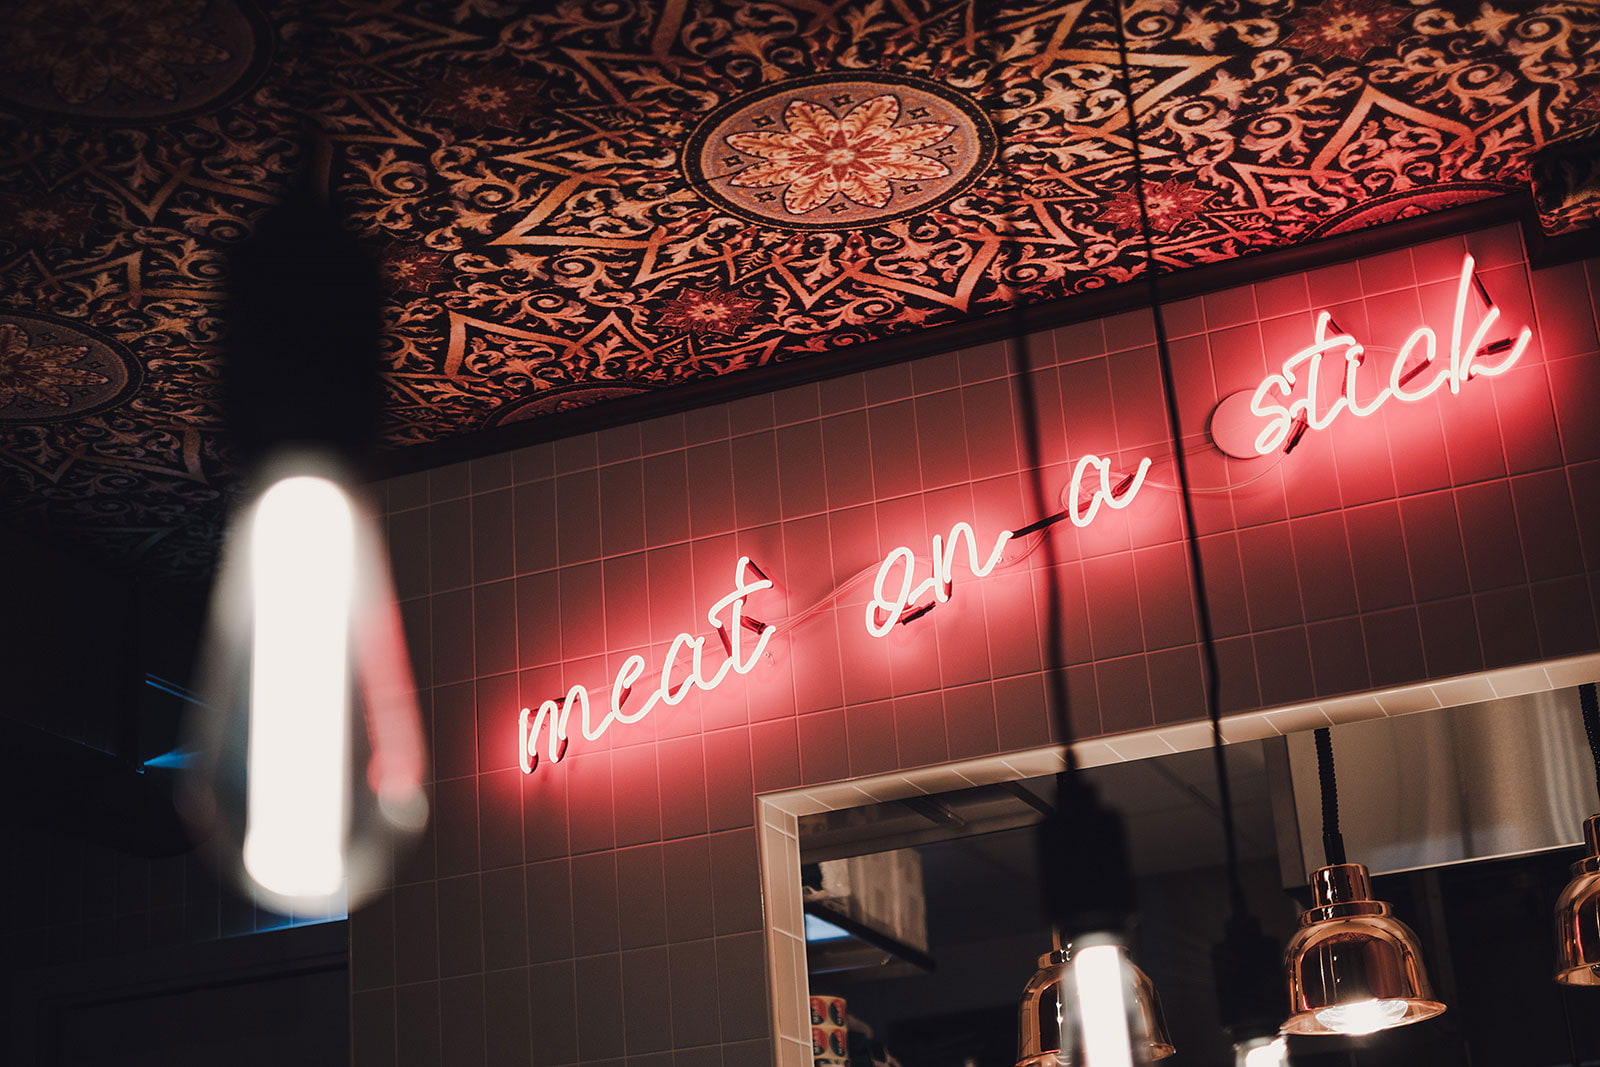 M.O.A.S – Meat on a Stick Nytorget